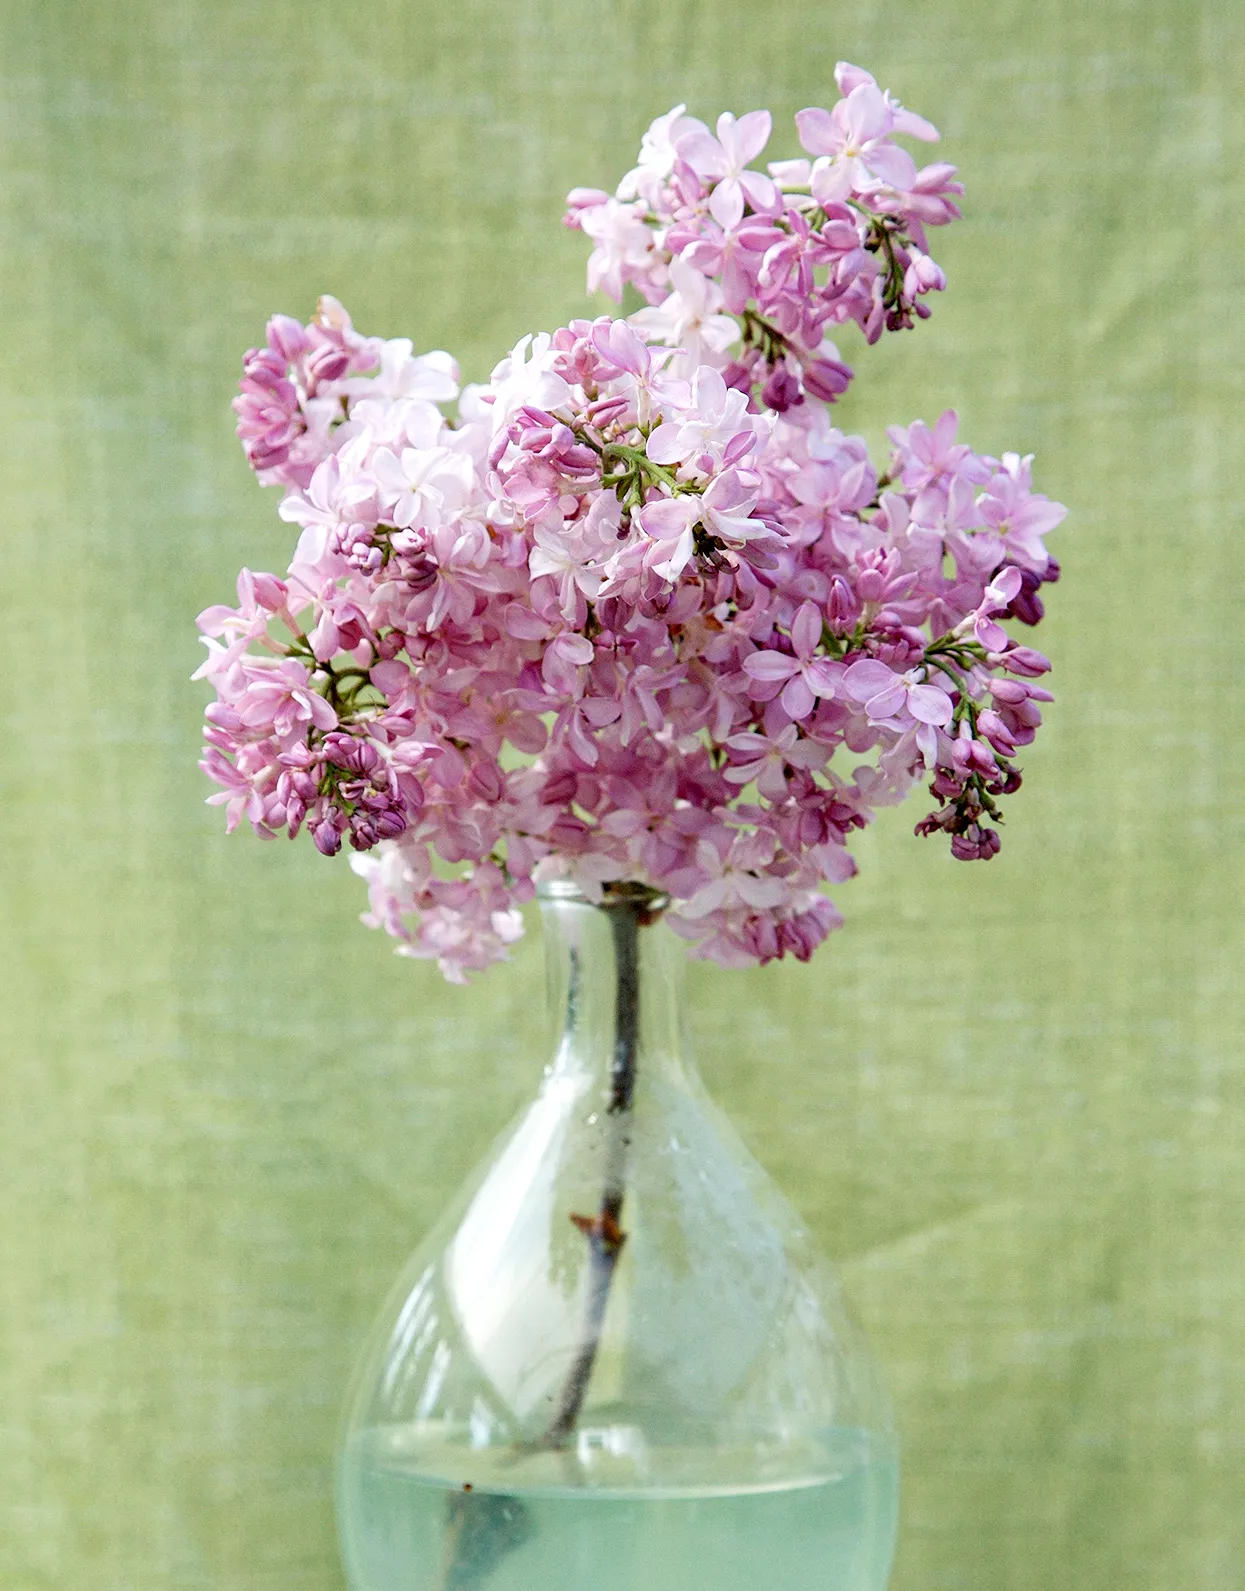 candy pink Syringa 'Maiden's Blush' lilac blooms